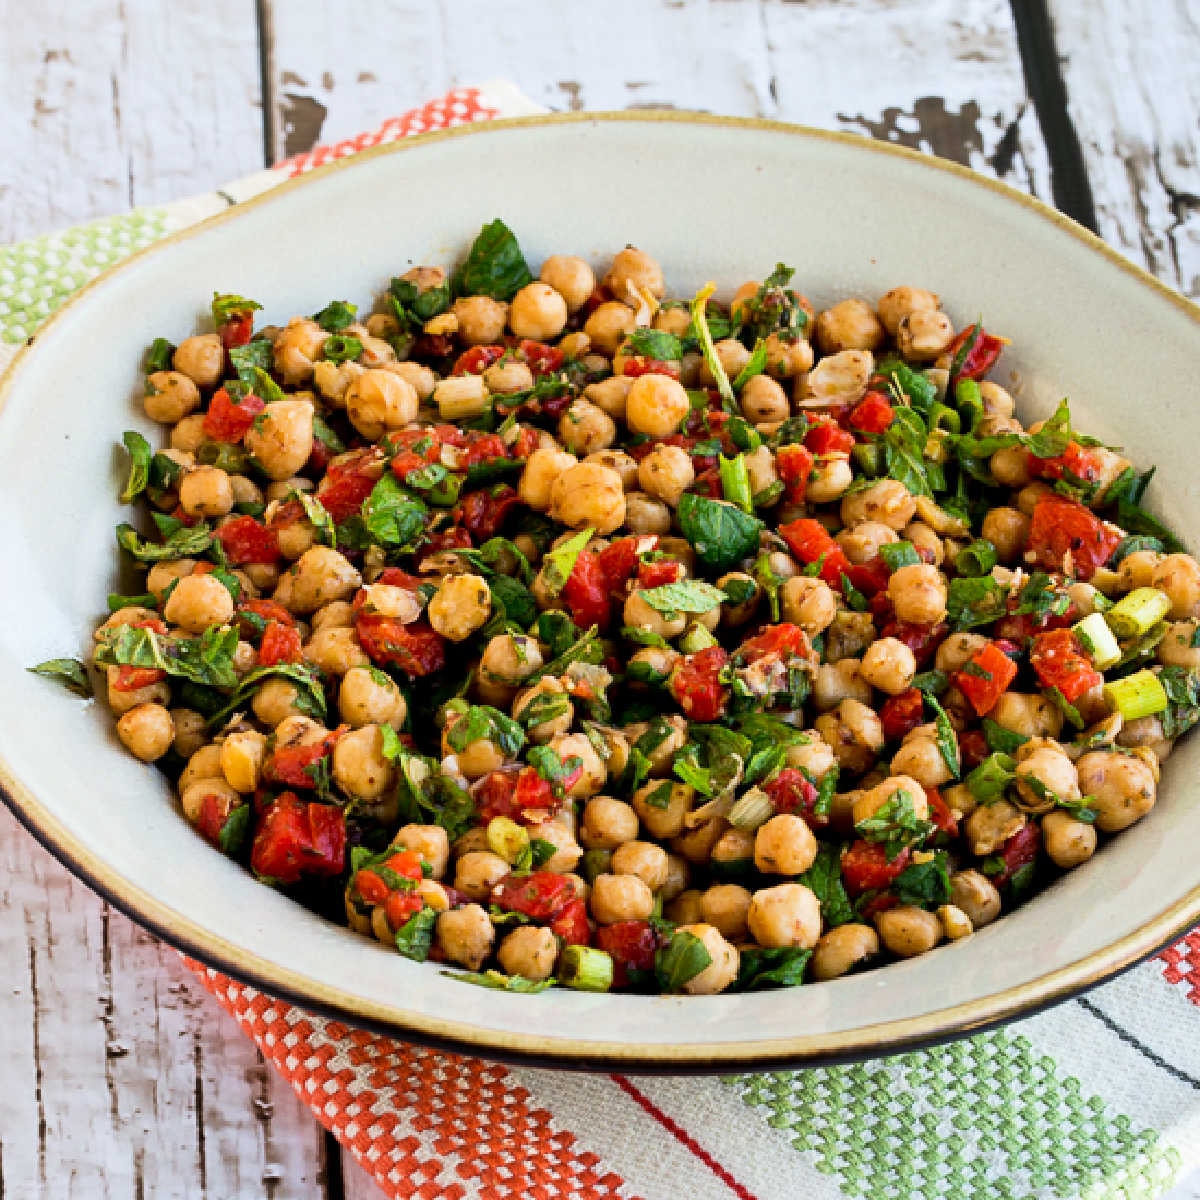 Square image of Mediterranean Chickpea Salad shown in serving bowl.